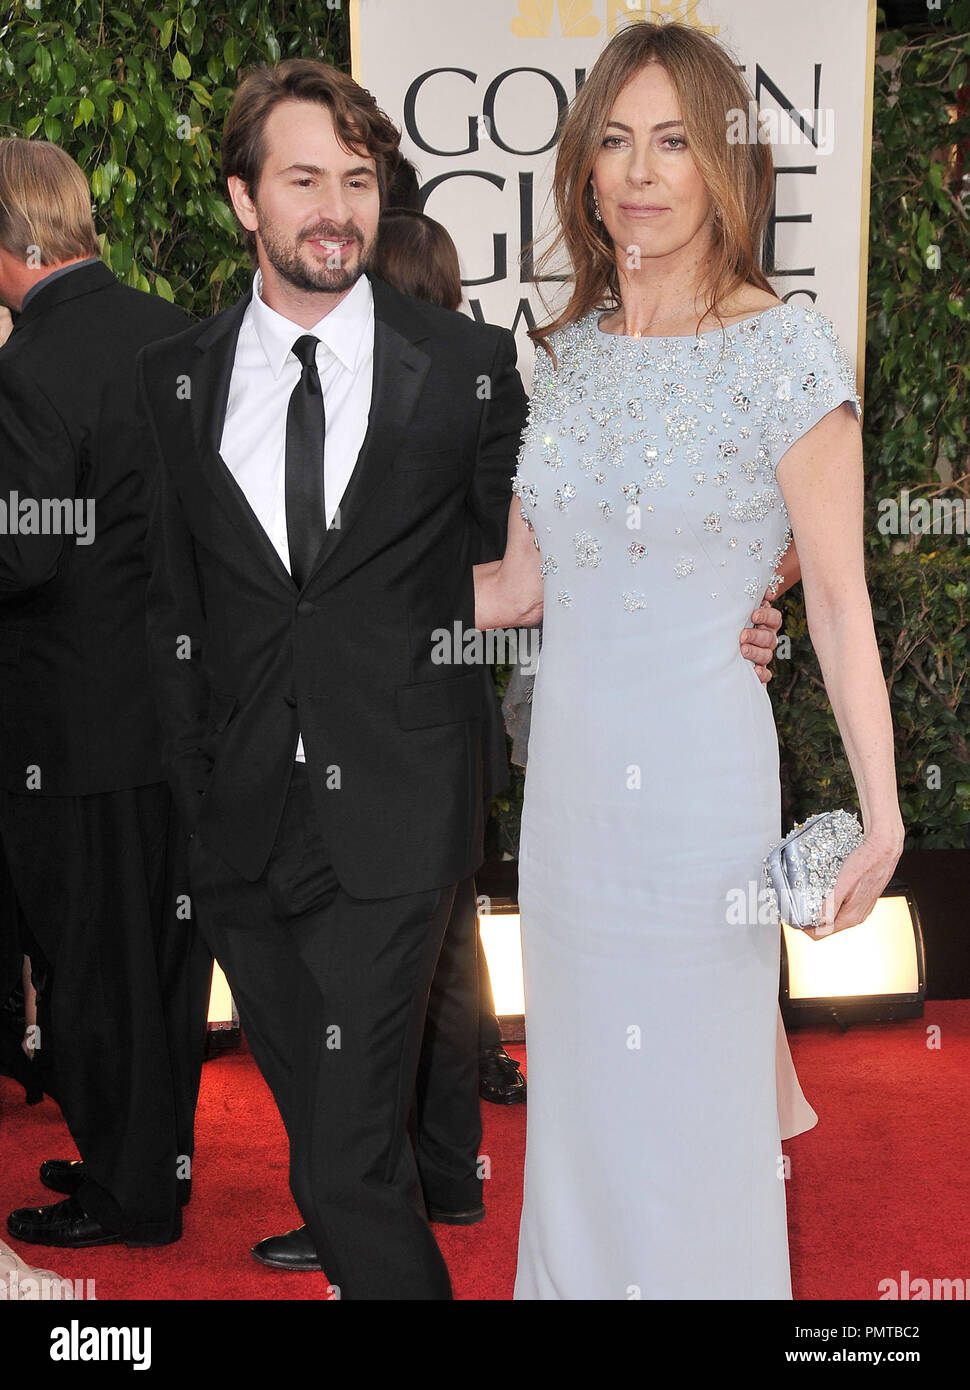 Mark Boal & Kathryn Bigelow at the 70th Annual Golden Globe Awards - Arrivals held at The Beverly Hilton Hotel in Beverly Hills, CA.The event took place on Sunday, January 13, 2013. Photo by PRPP / PictureLux   File Reference # 31805 1484PRPP  For Editorial Use Only -  All Rights Reserved Stock Photo